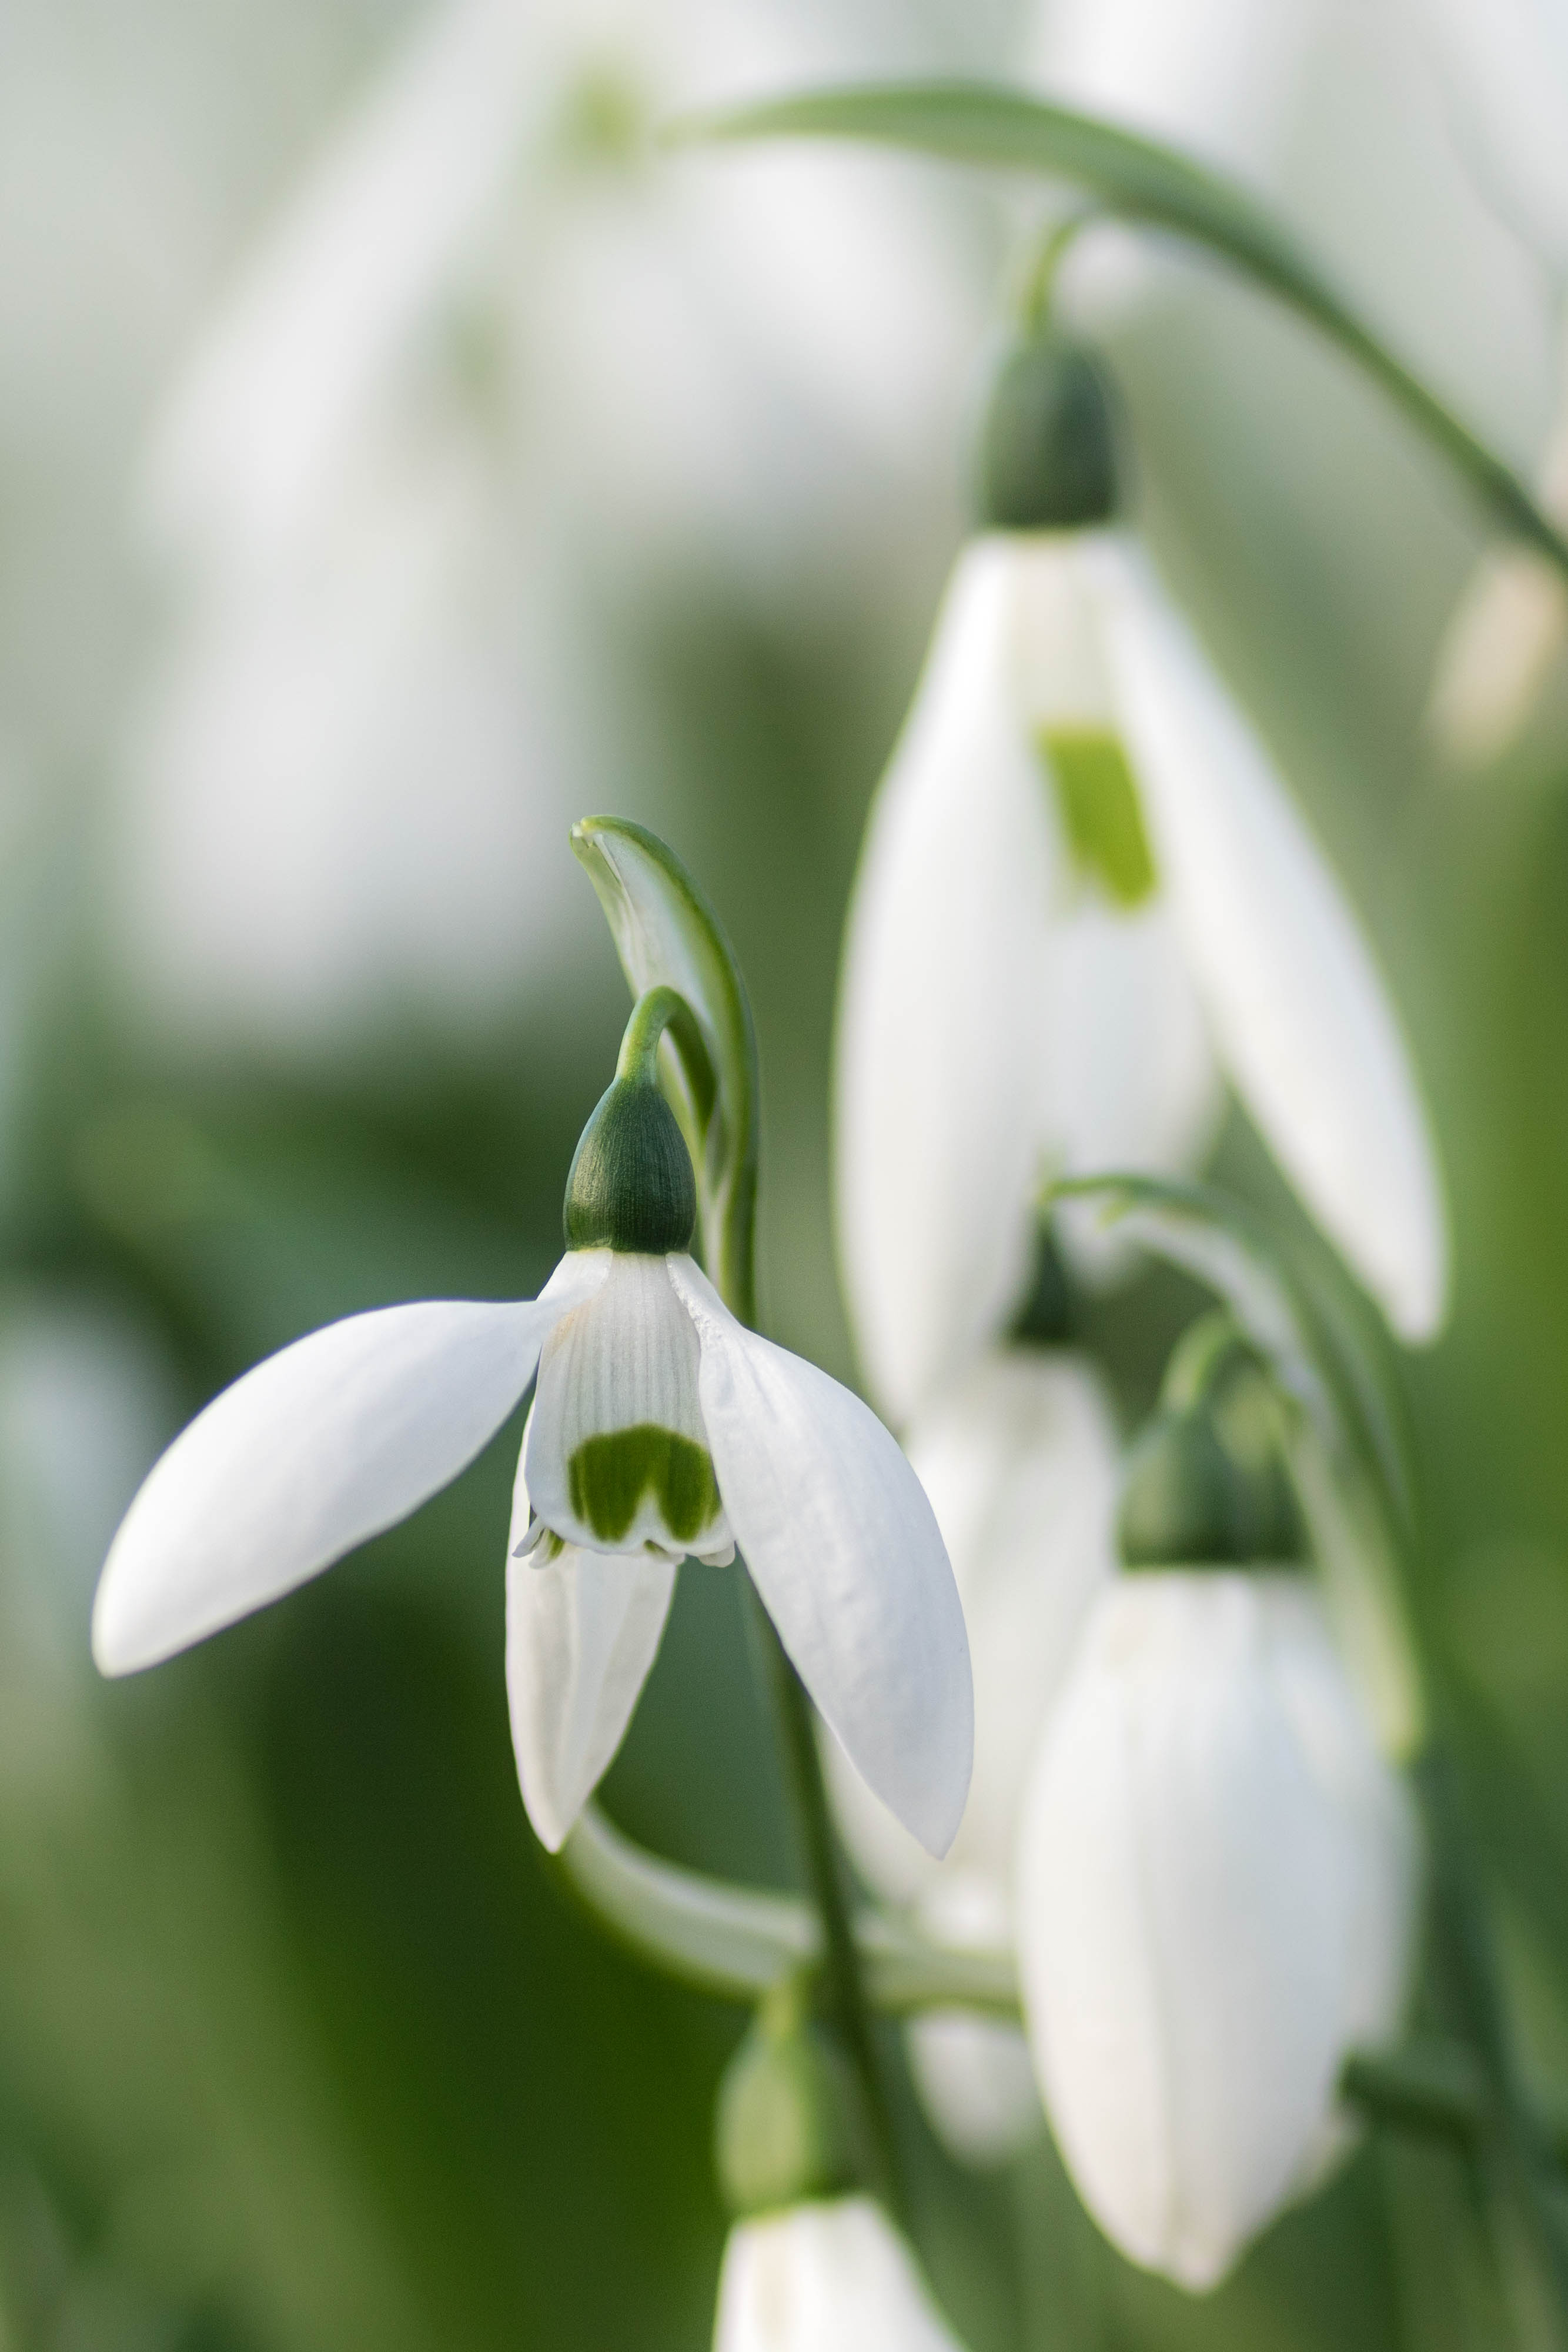 1080p Snowdrops Hd Images